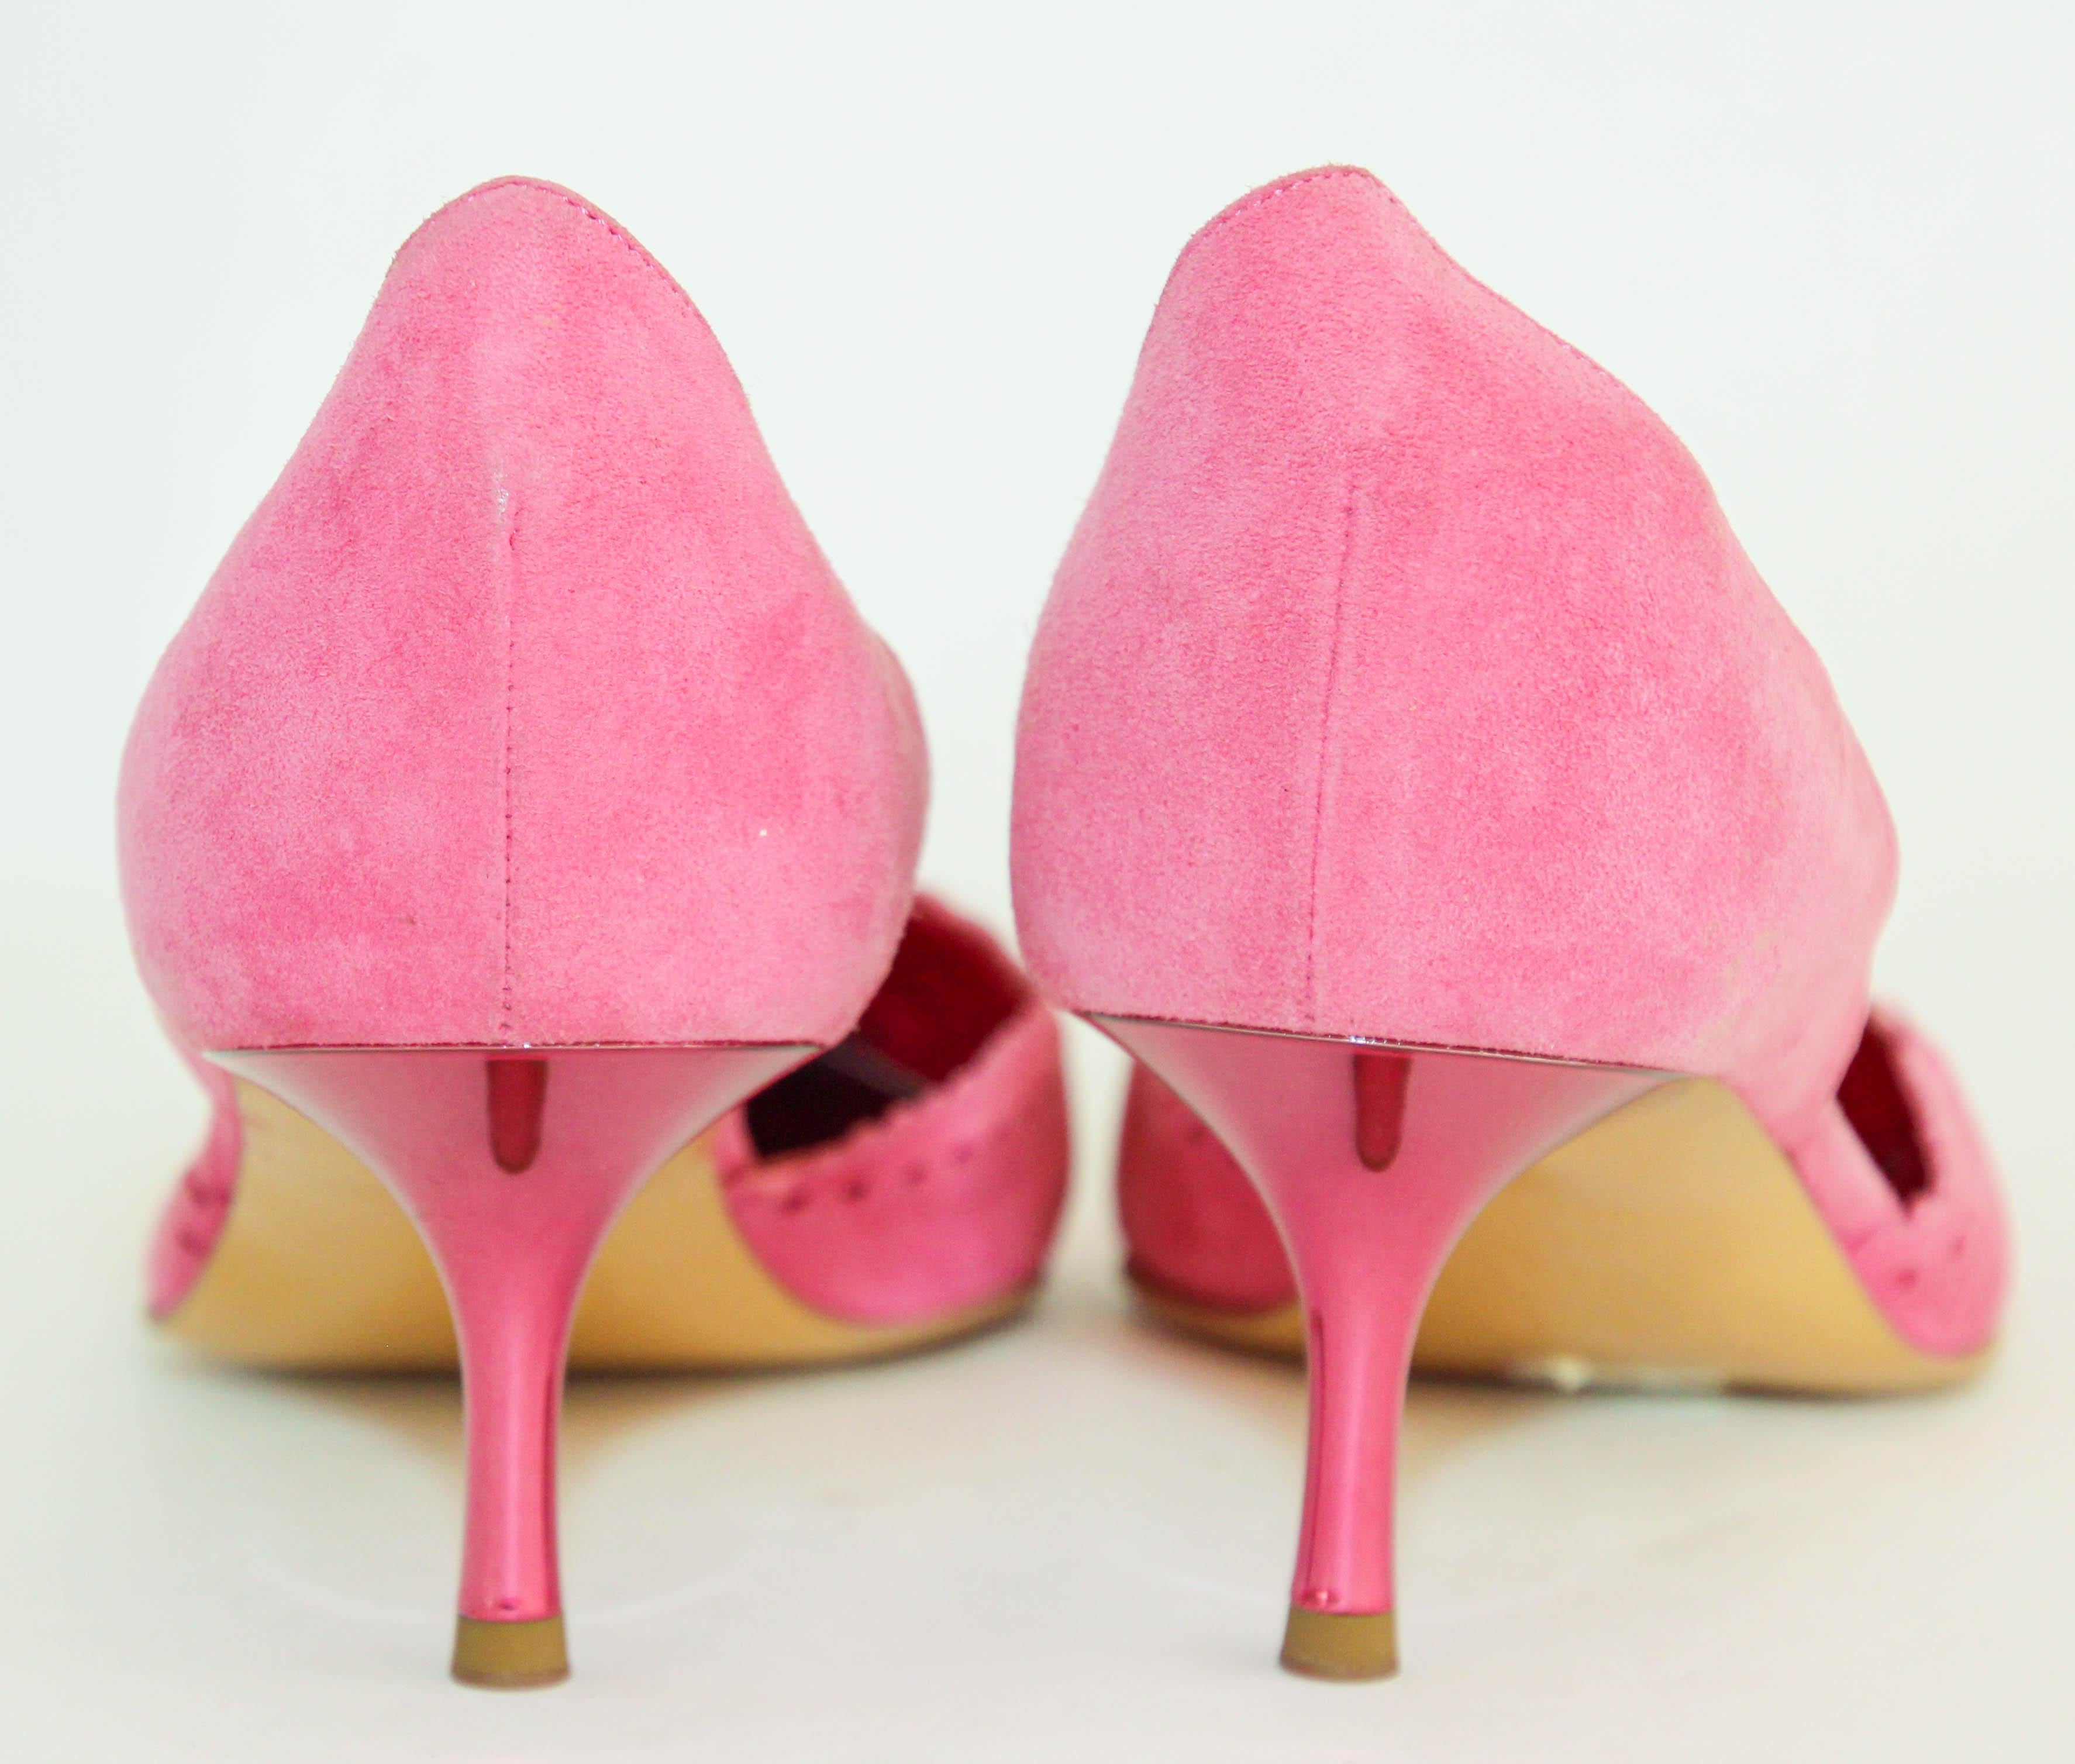 Escada Hot Pink Suede Pumps with Leather Details Size 36.5 Italy 5